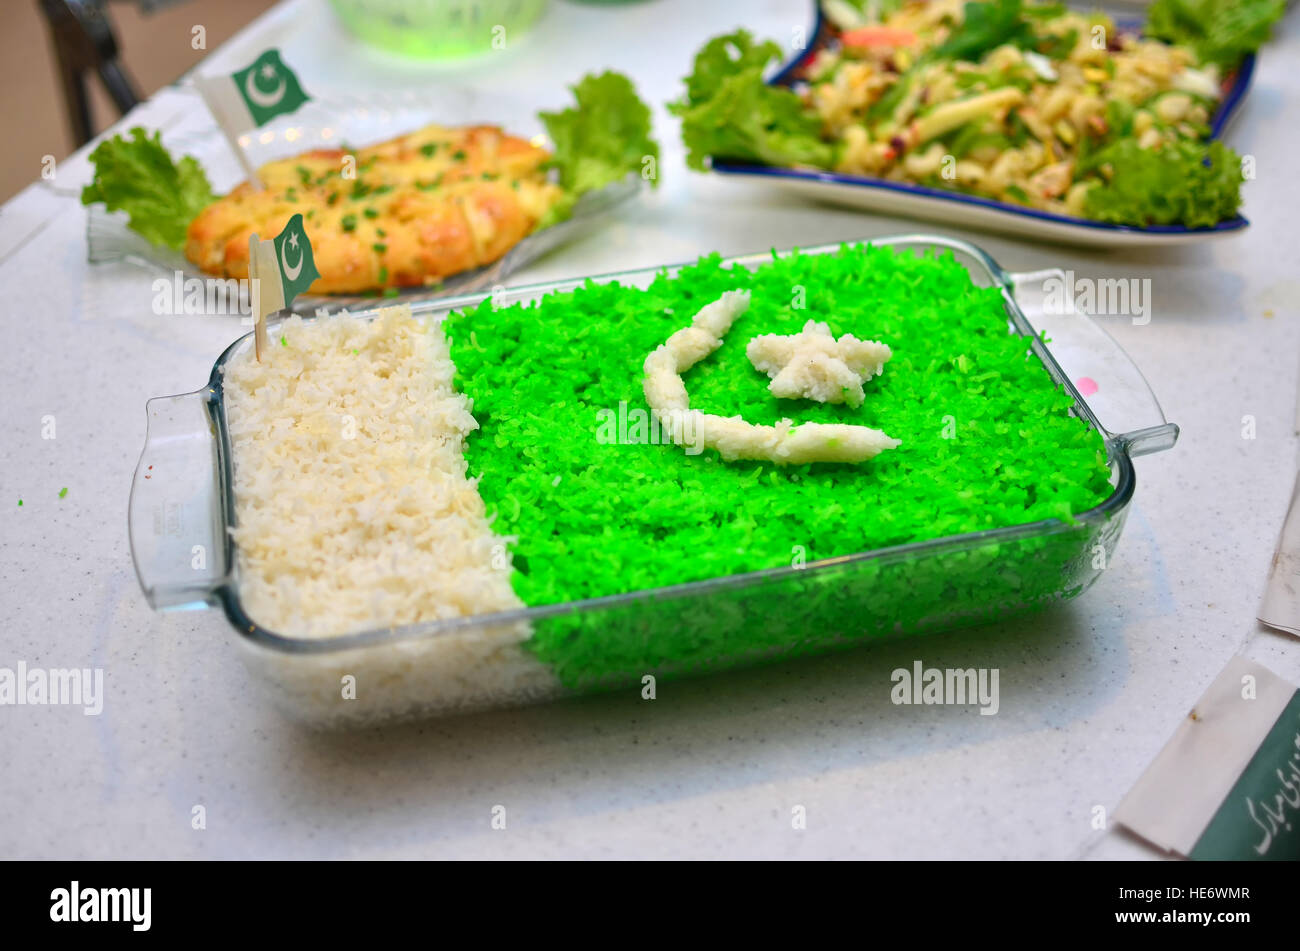 A tray of rice with Pakistan flag made with dye Stock Photo